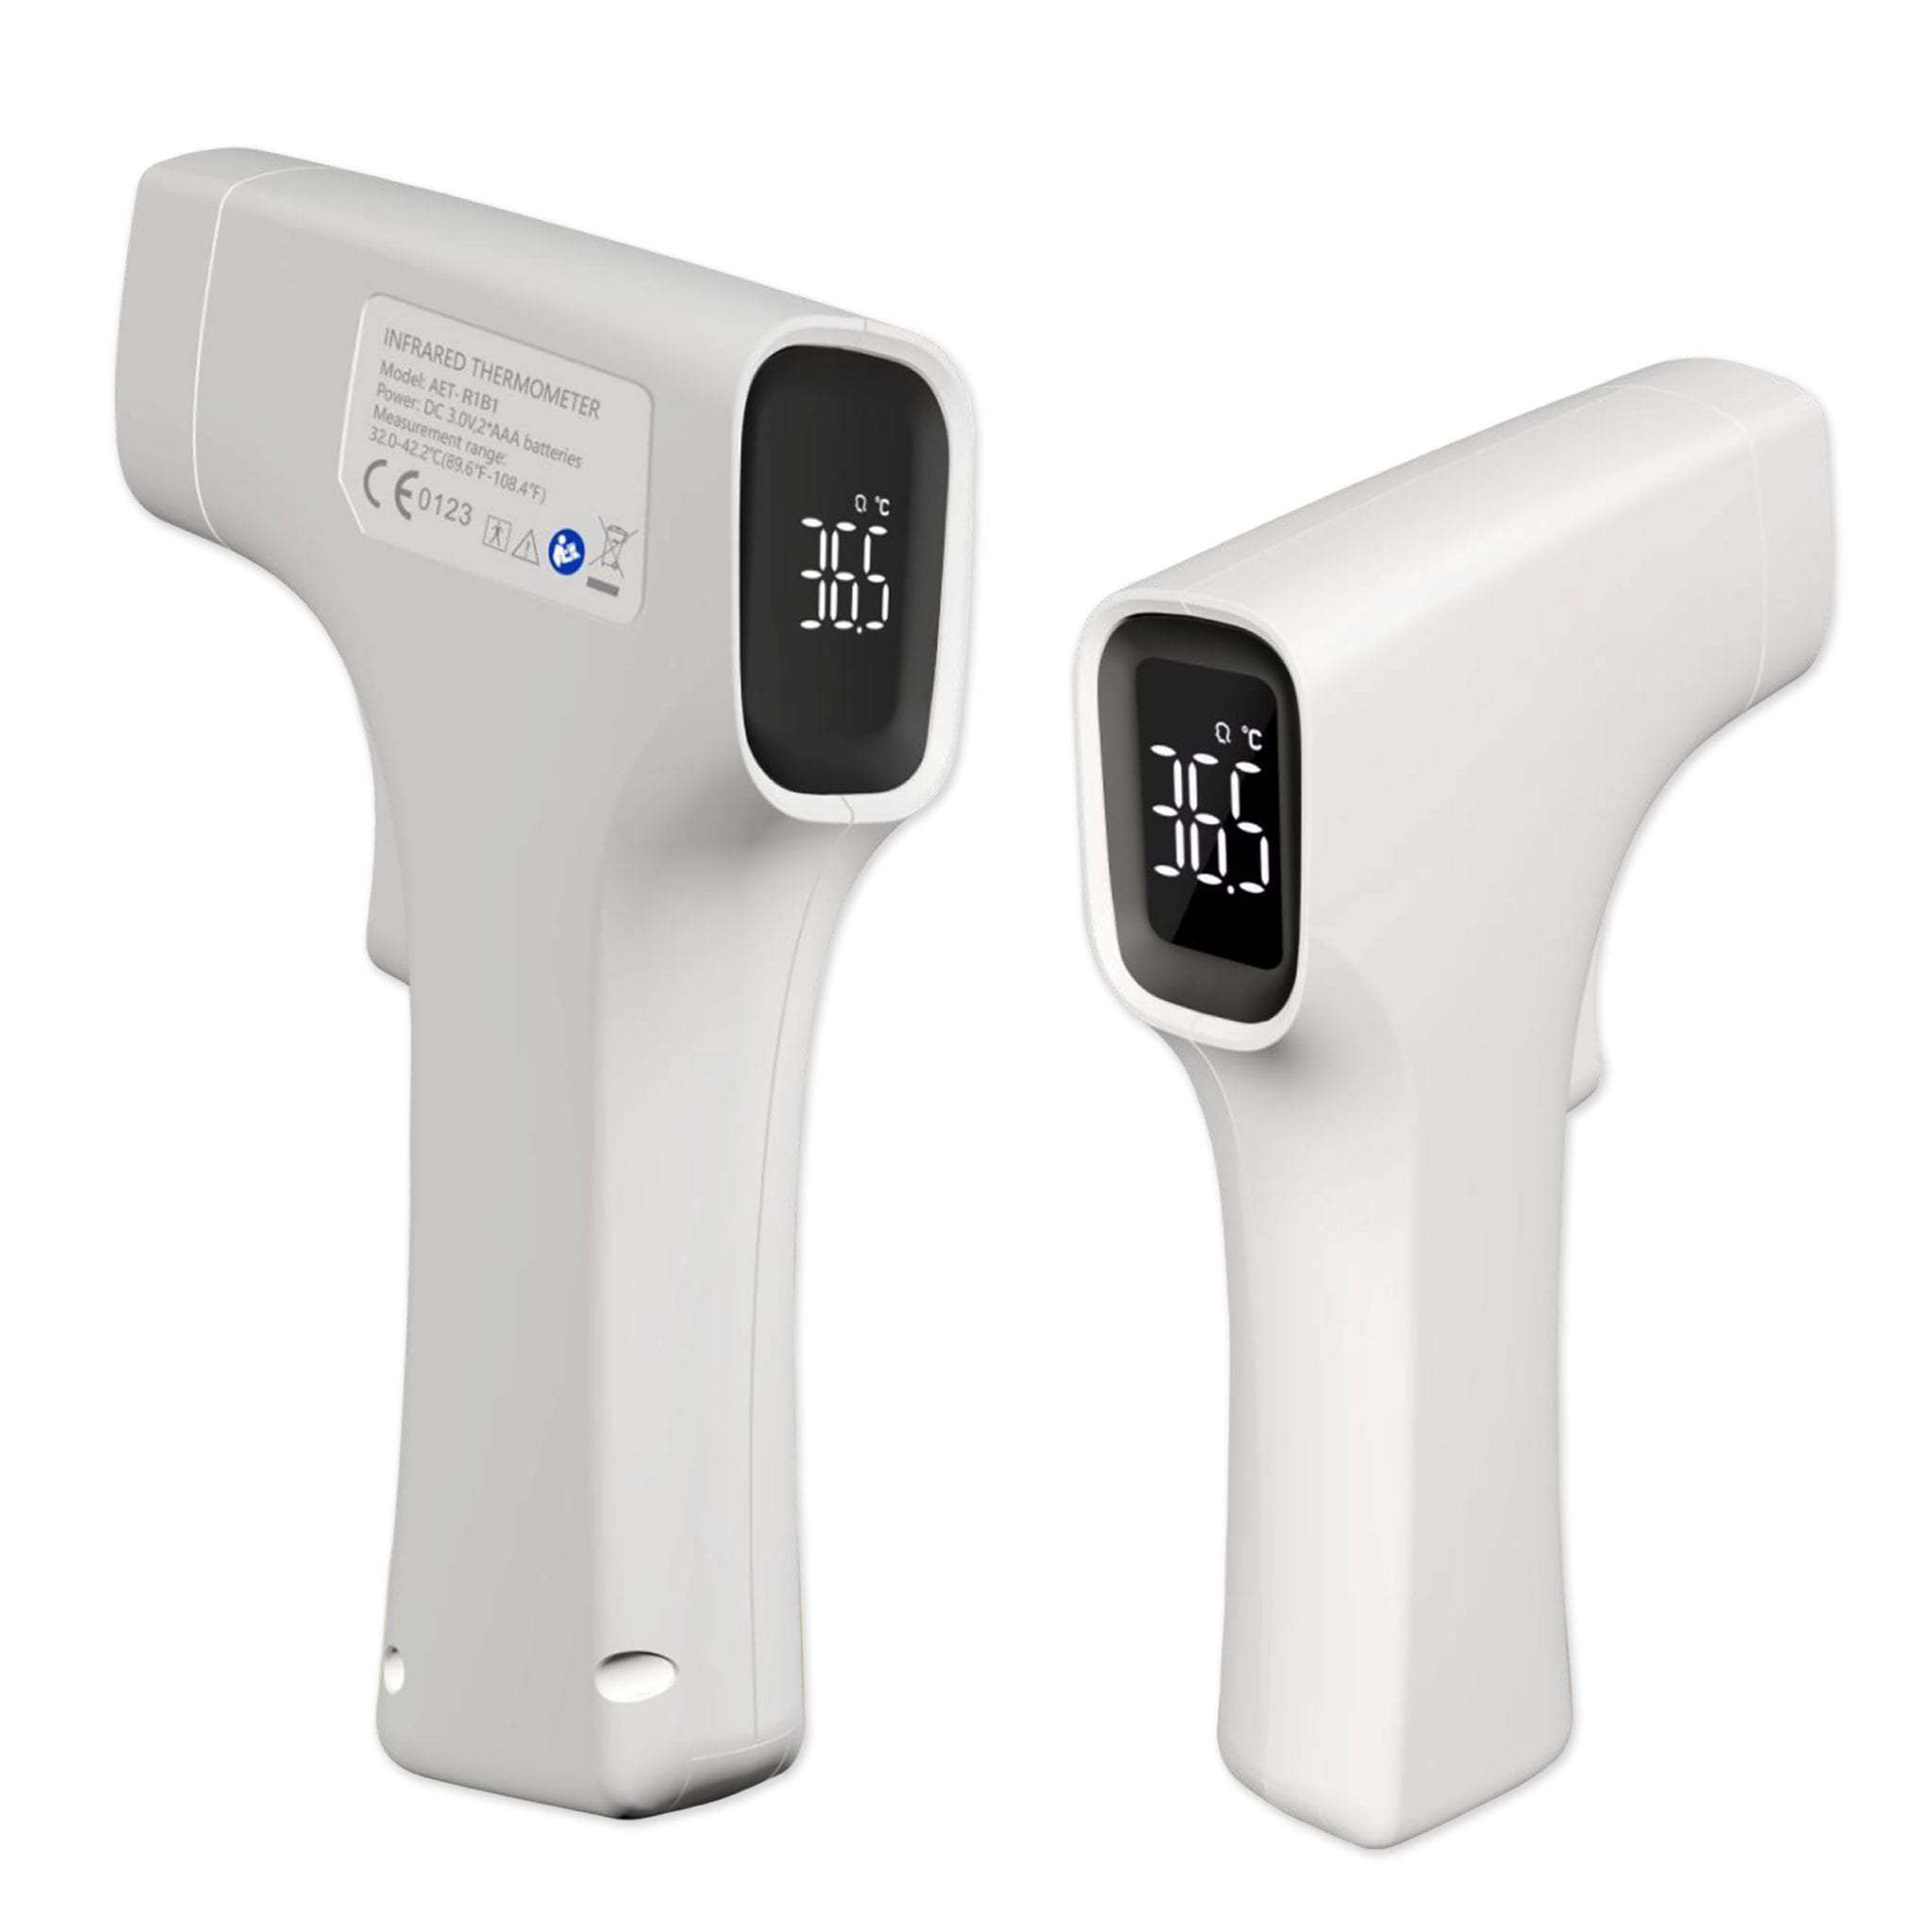 Propper FDA Approved Infrared Digital Thermometer